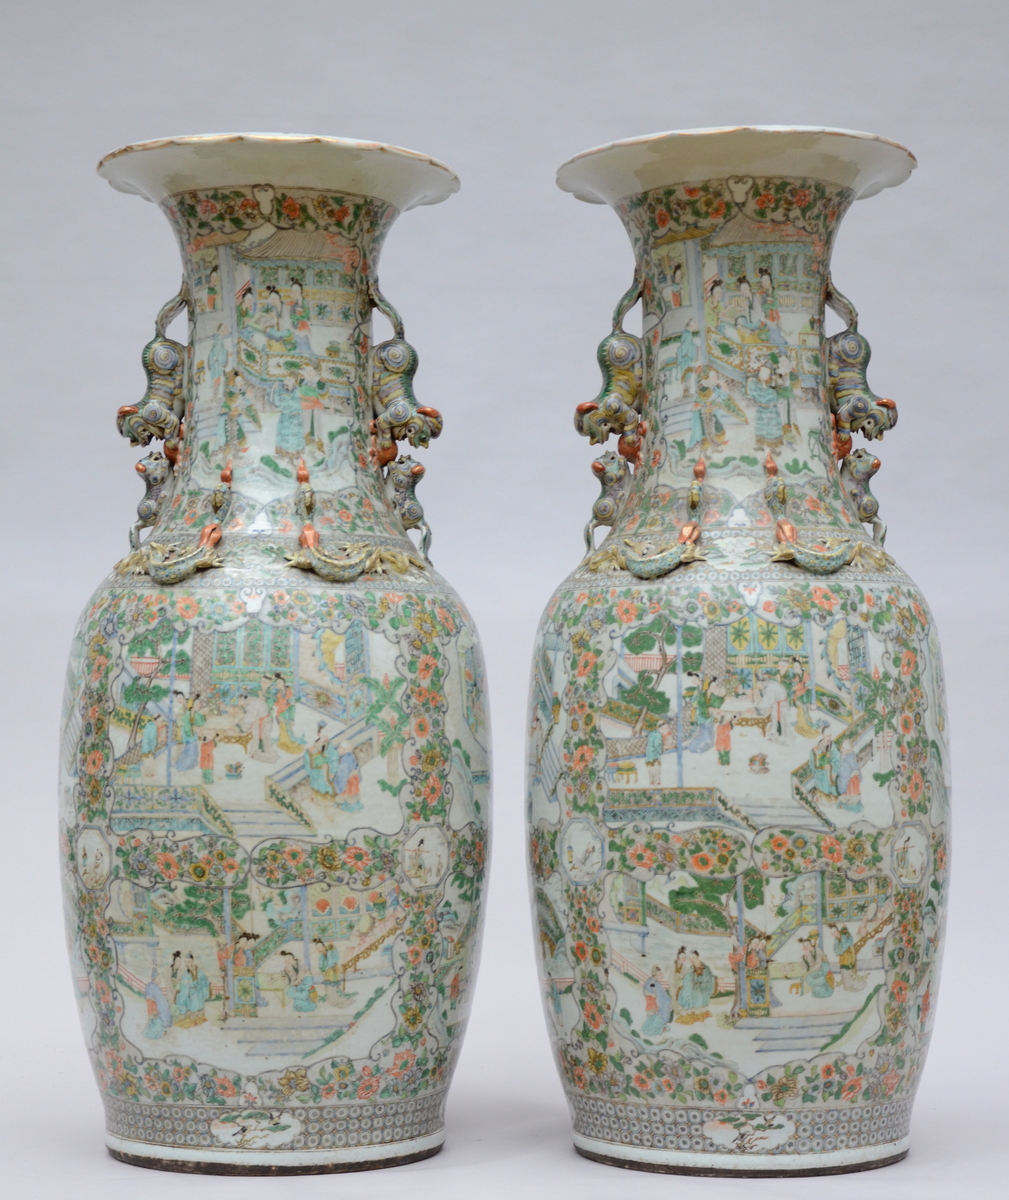 A pair of large Canton famille verte vases in Chinese porcelain, 19th century (h90cm) (*) - Image 3 of 11